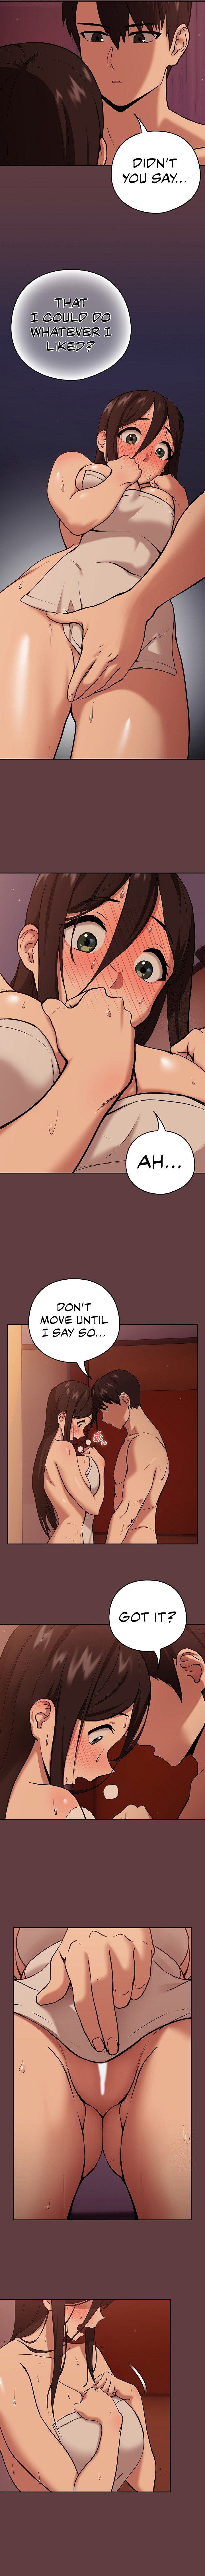 After Work Love Affairs - Chapter 5 Page 5